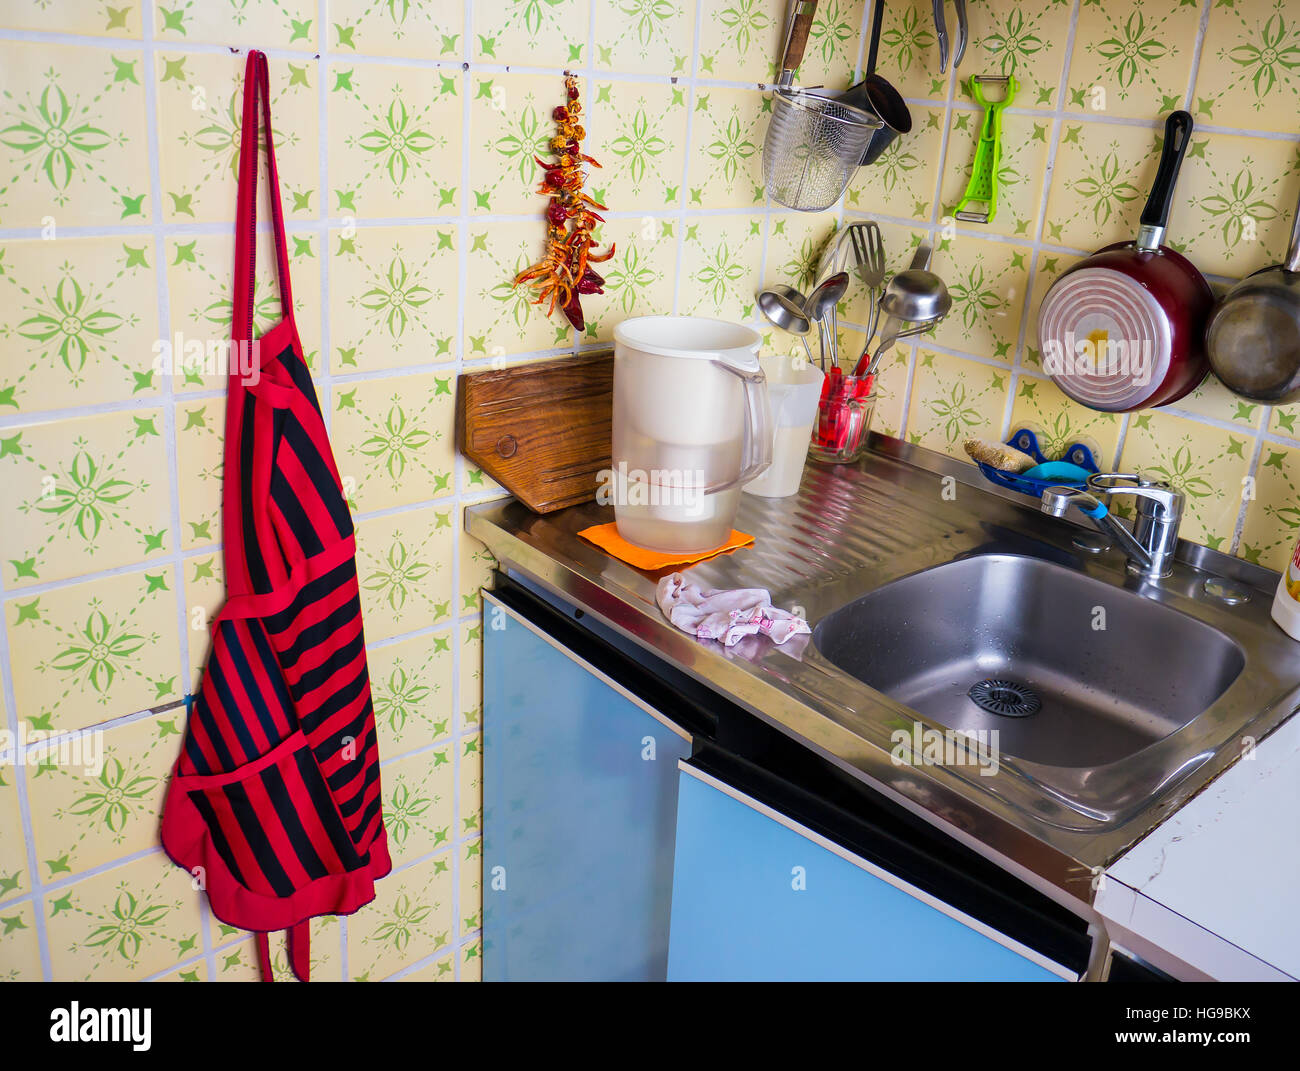 The Kitchen backgrounds and objects. Stock Photo